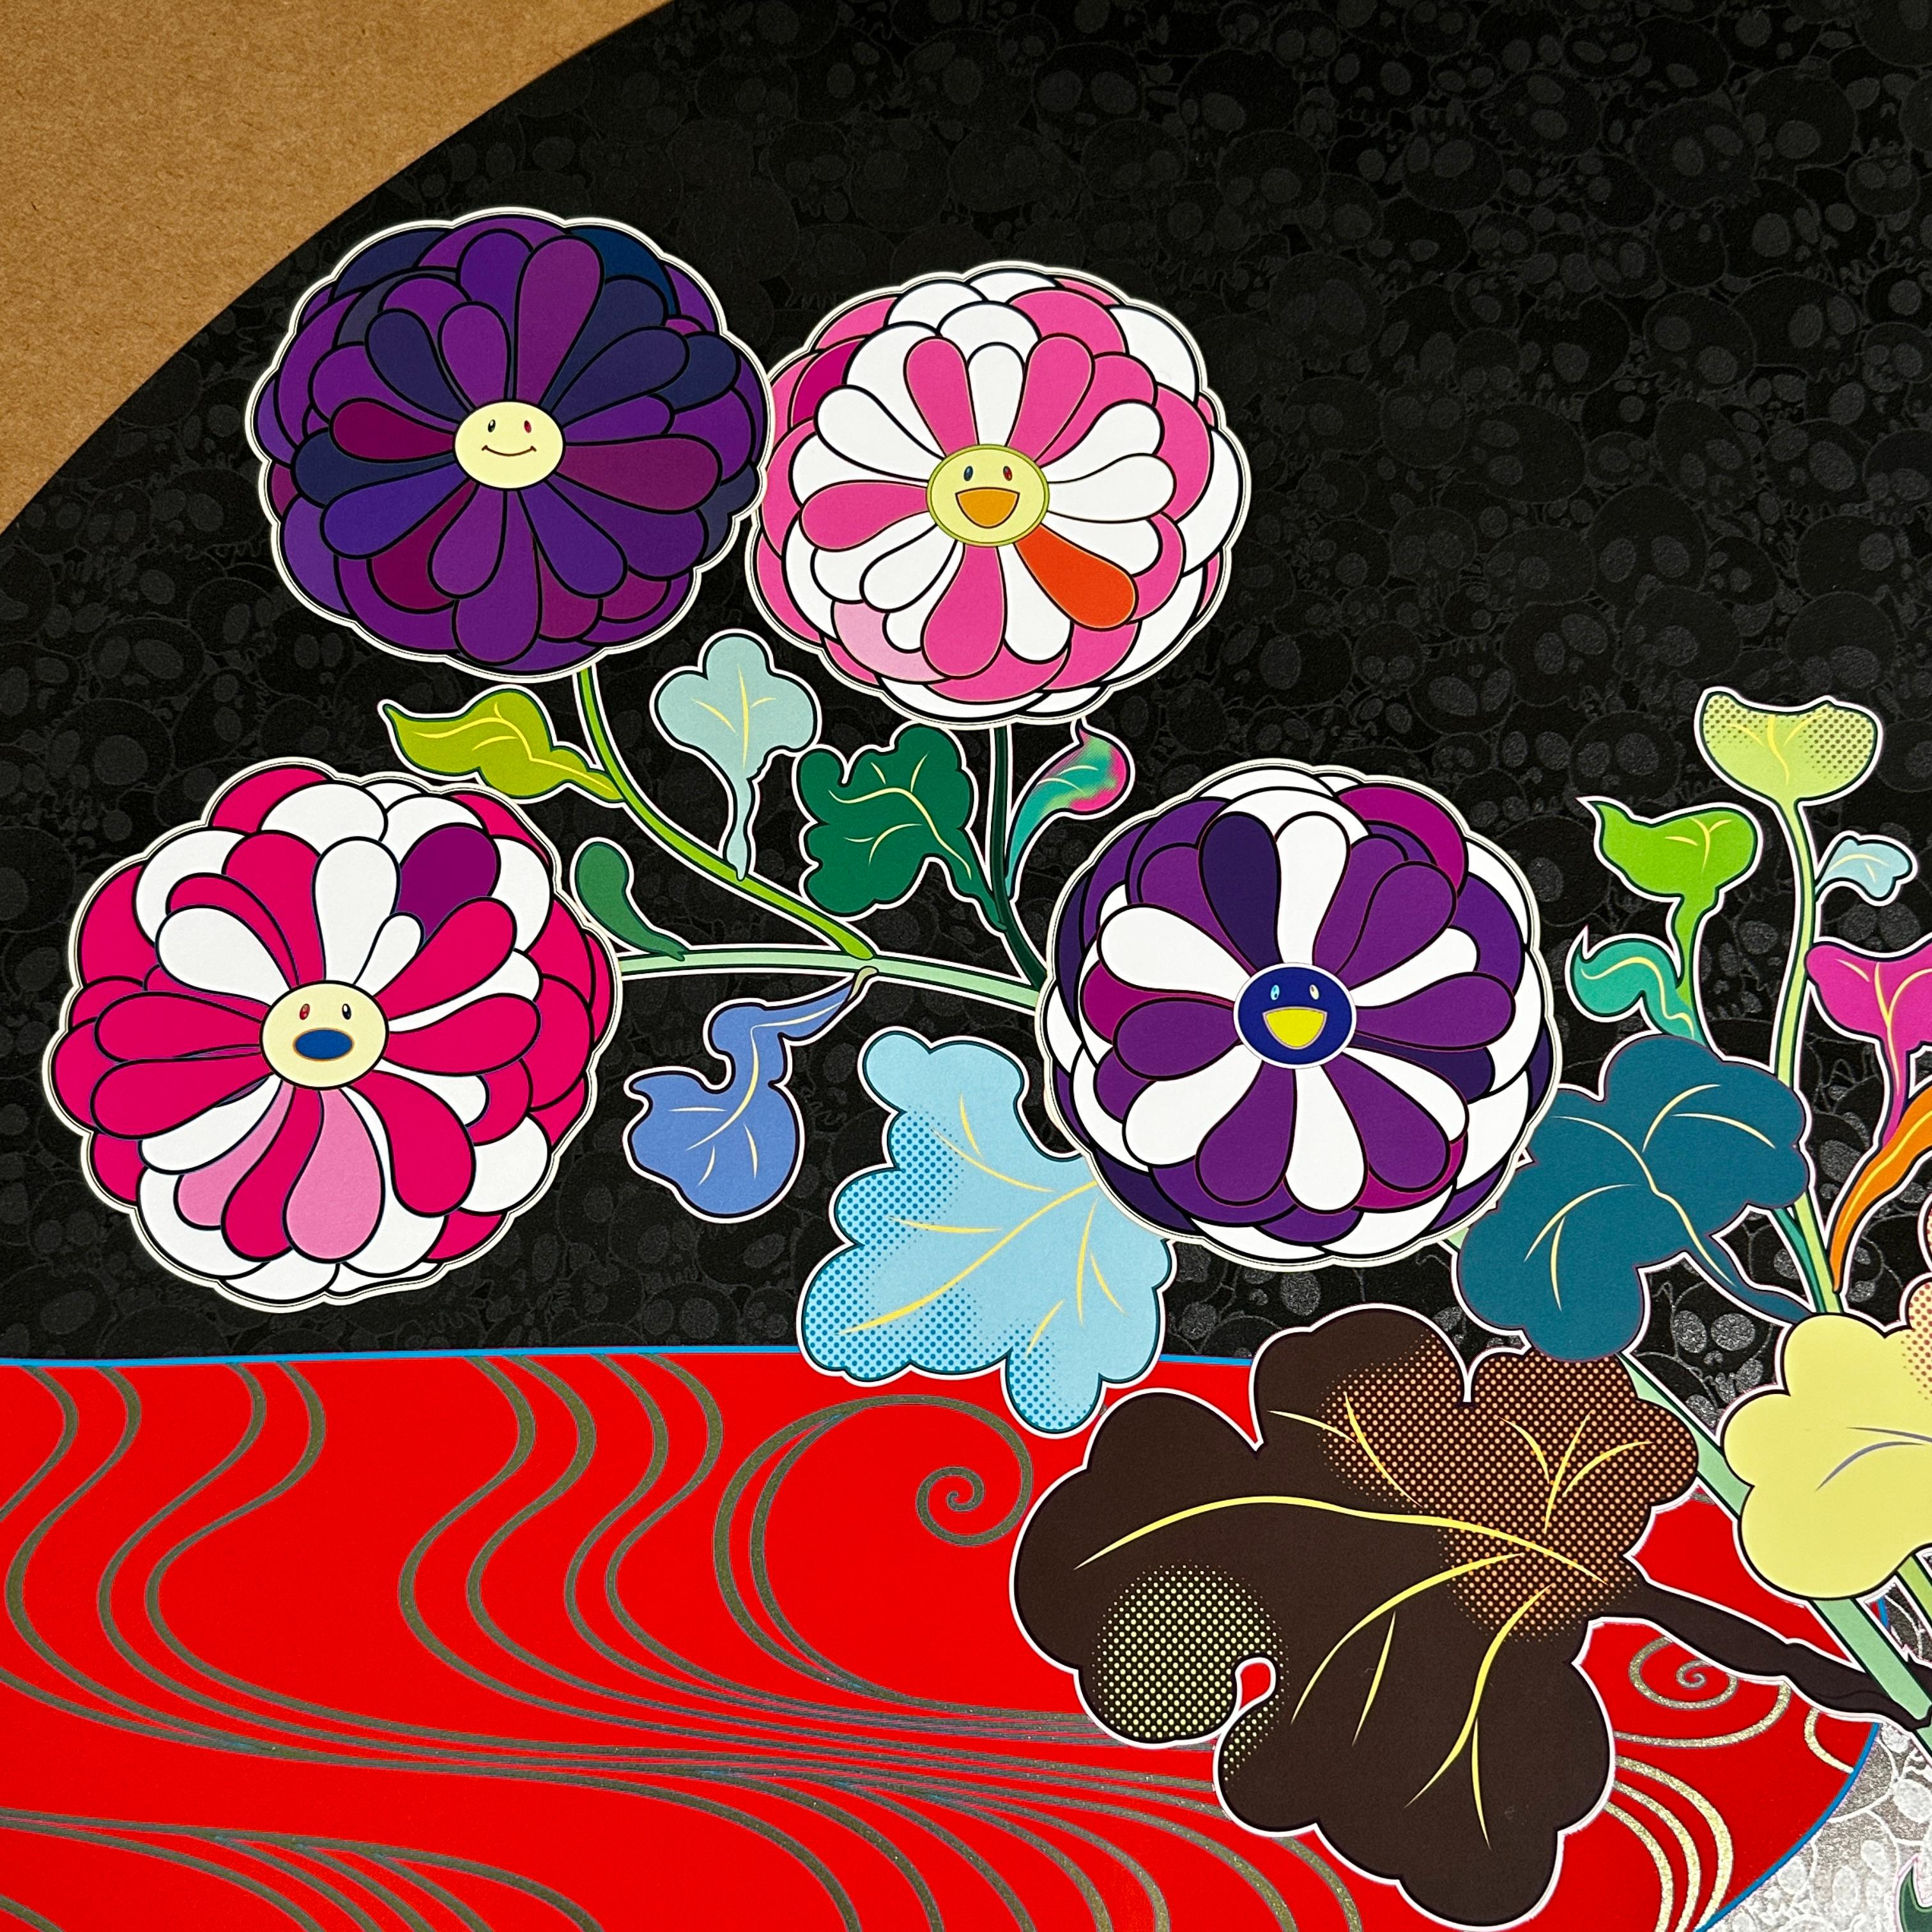 Flowers Blooming in the Isle of the Dead (Takashi Murakami, Tokyo, Flowers) 6